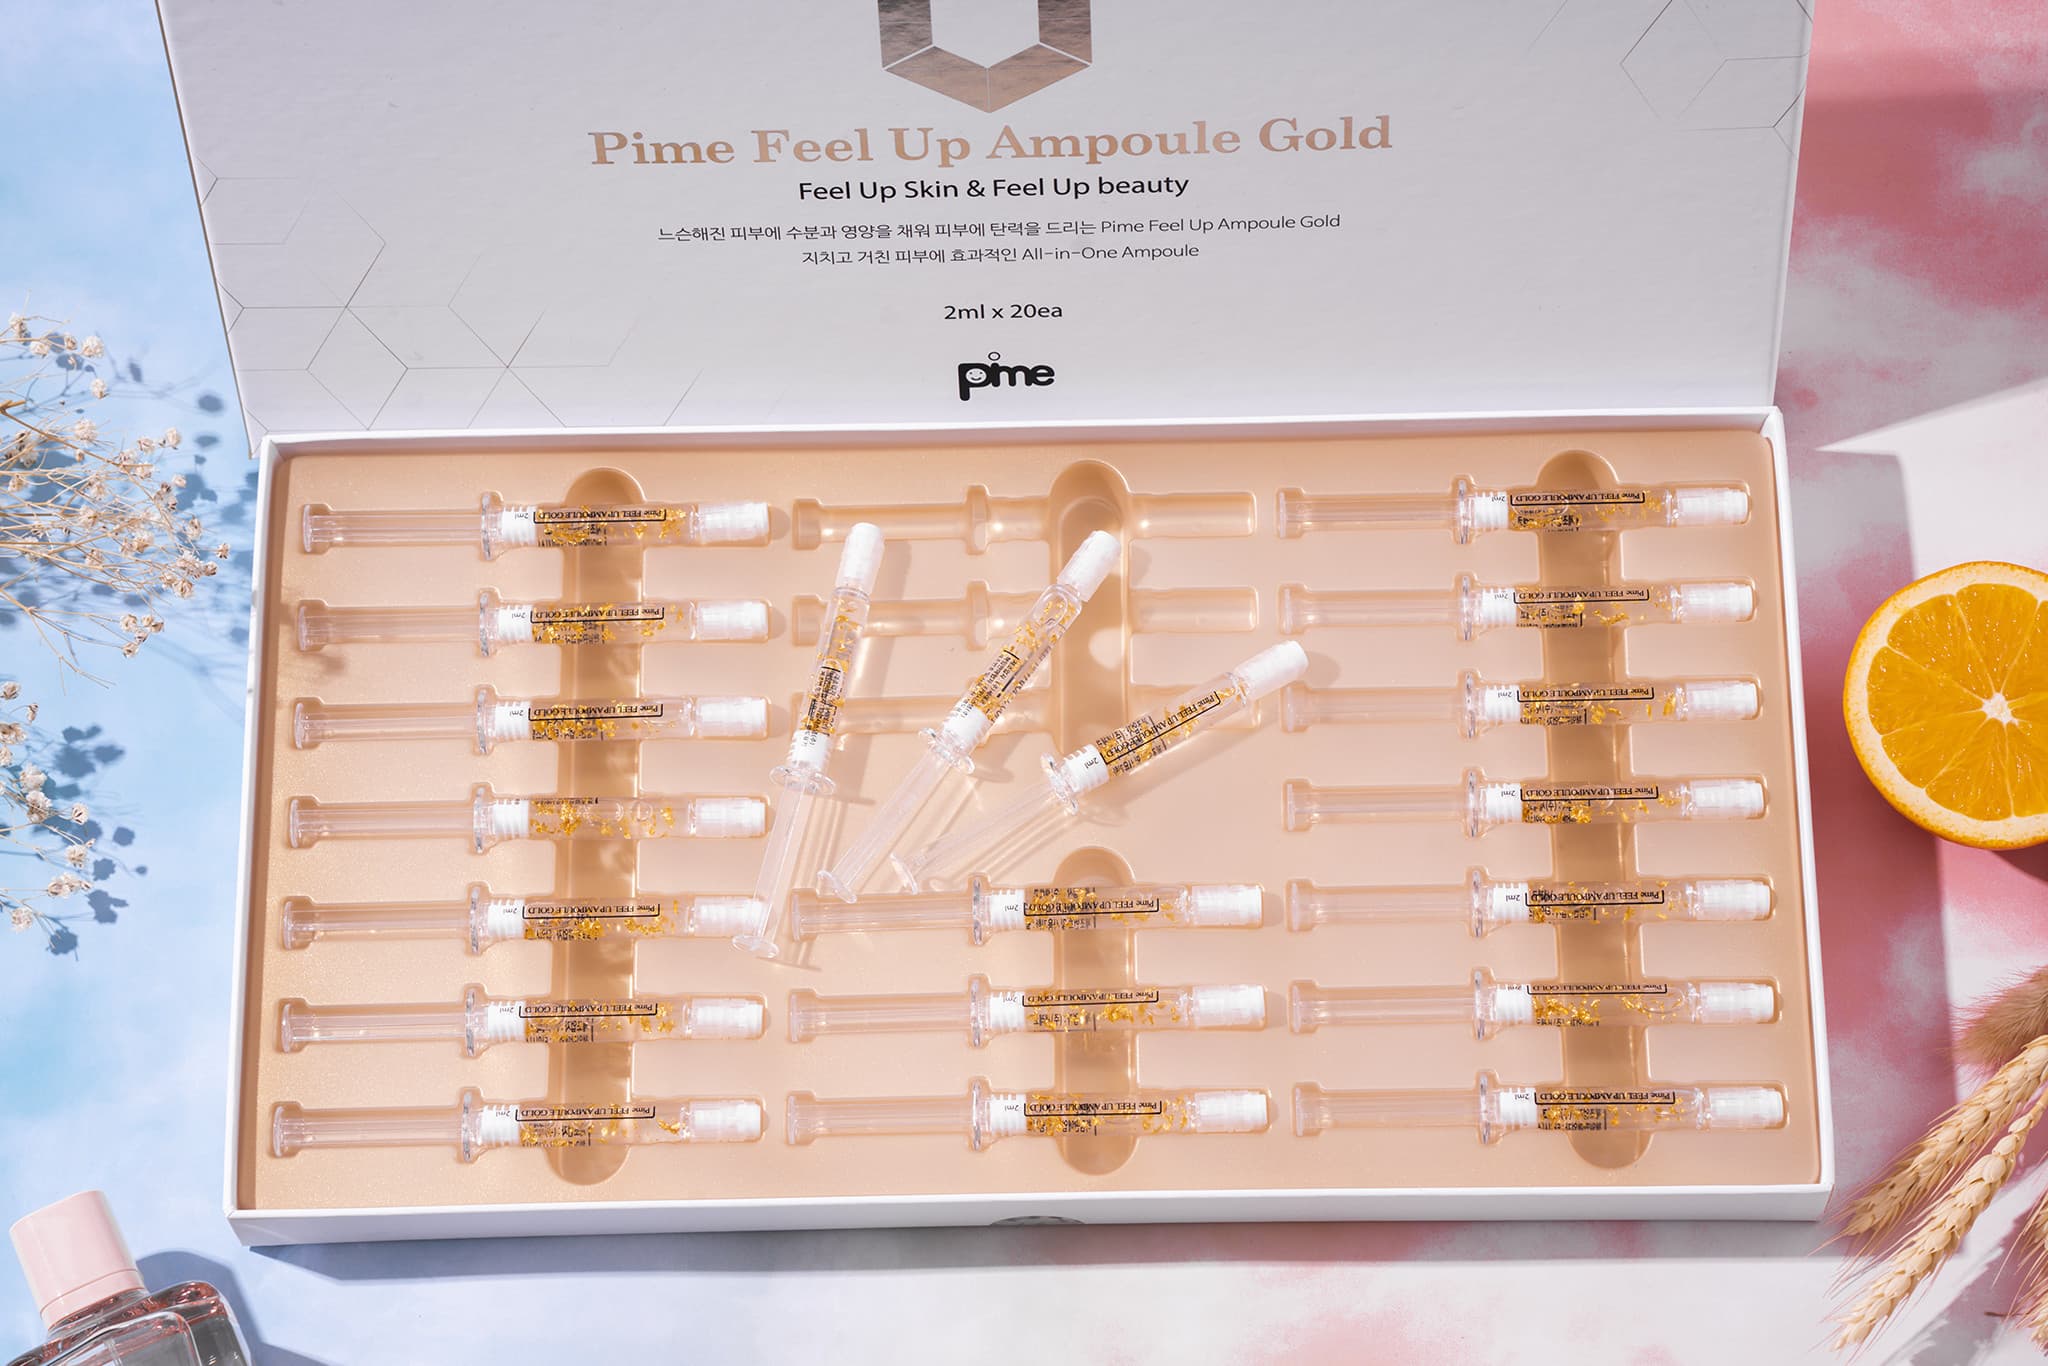 Pime Feel up Ampoule Gold Skin Care Cosmetics